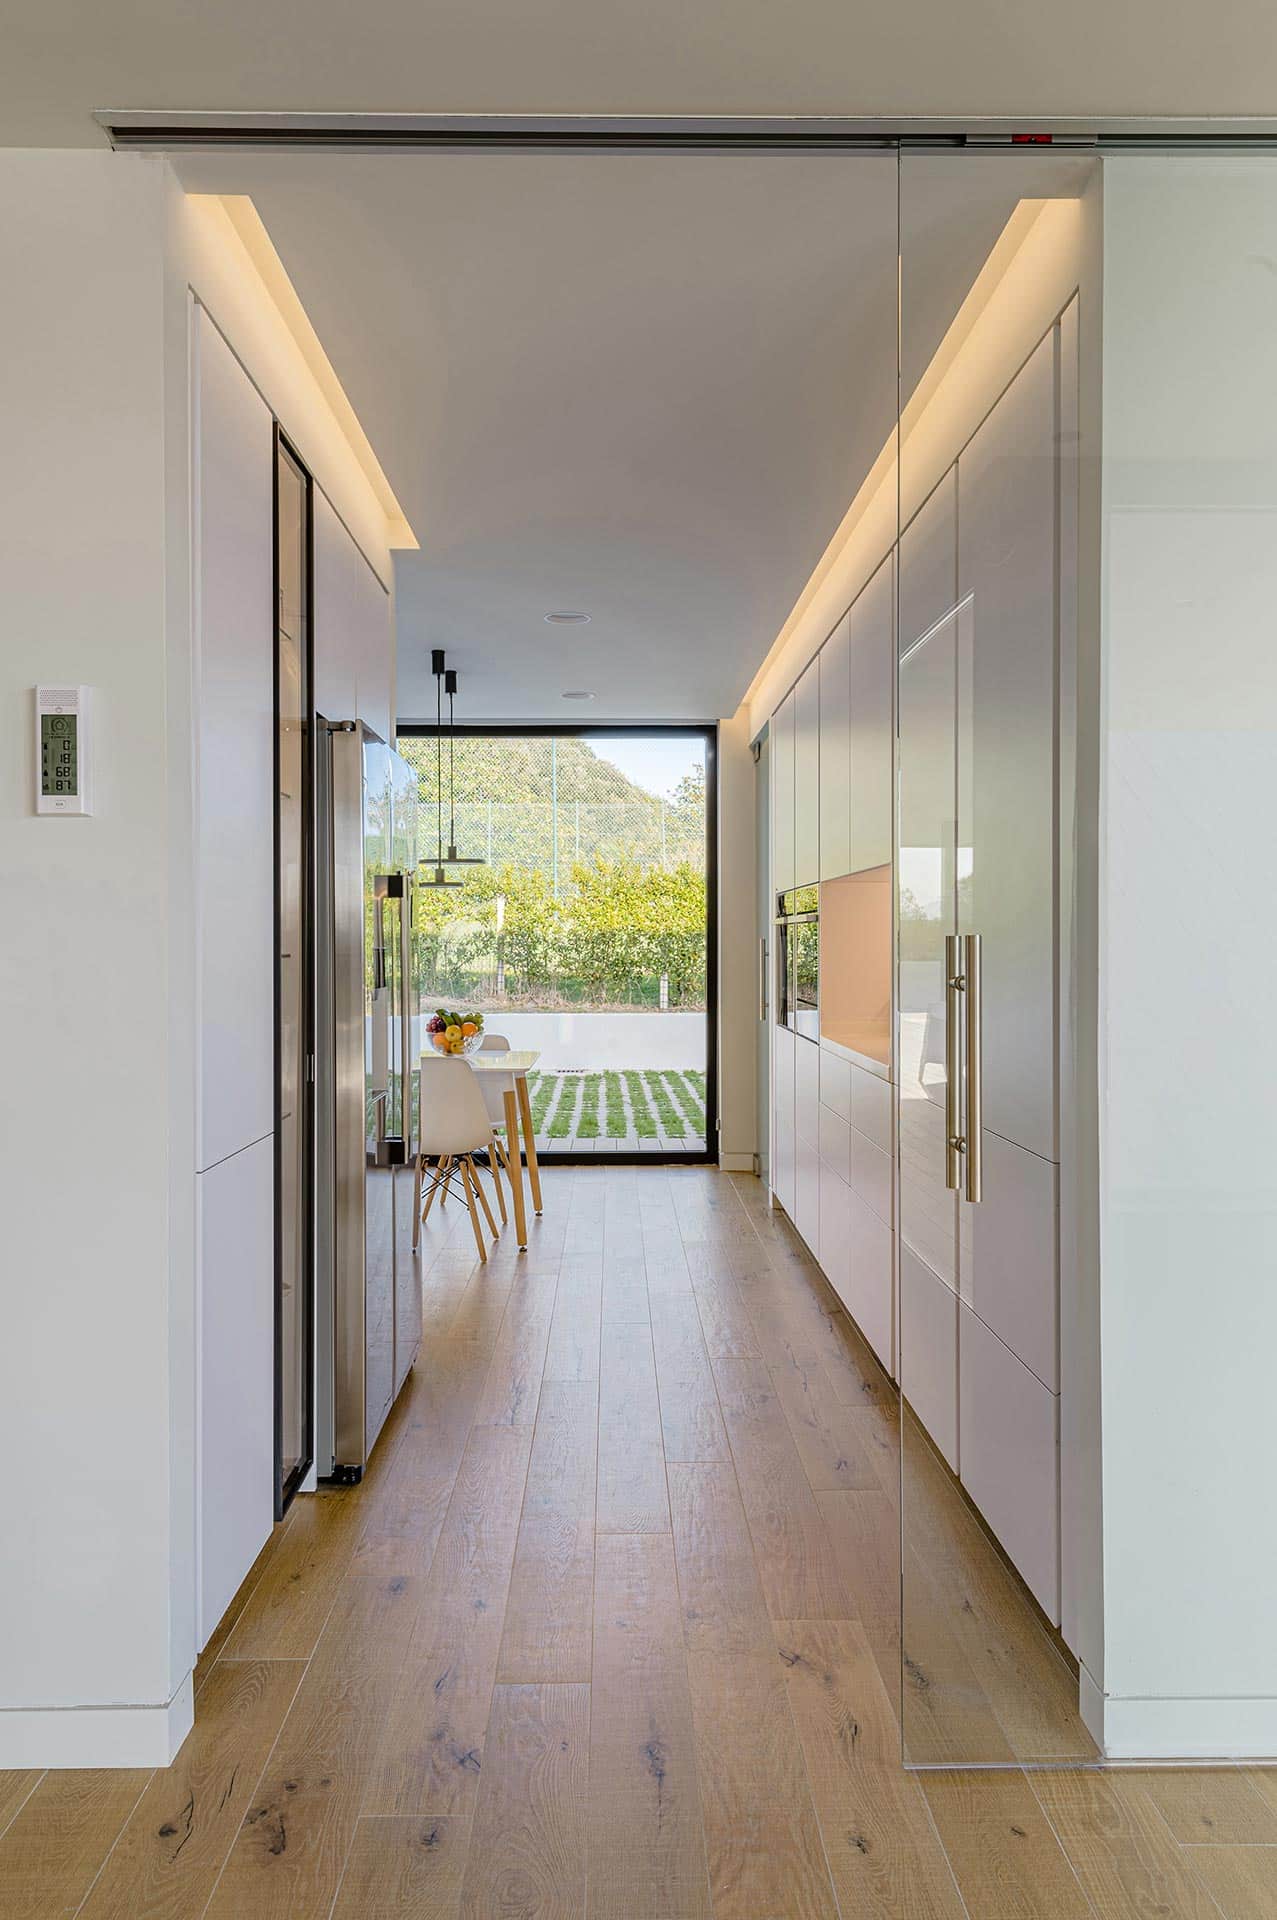 White kitchen with glass door in modern house designed by Moah Architects in Loredo